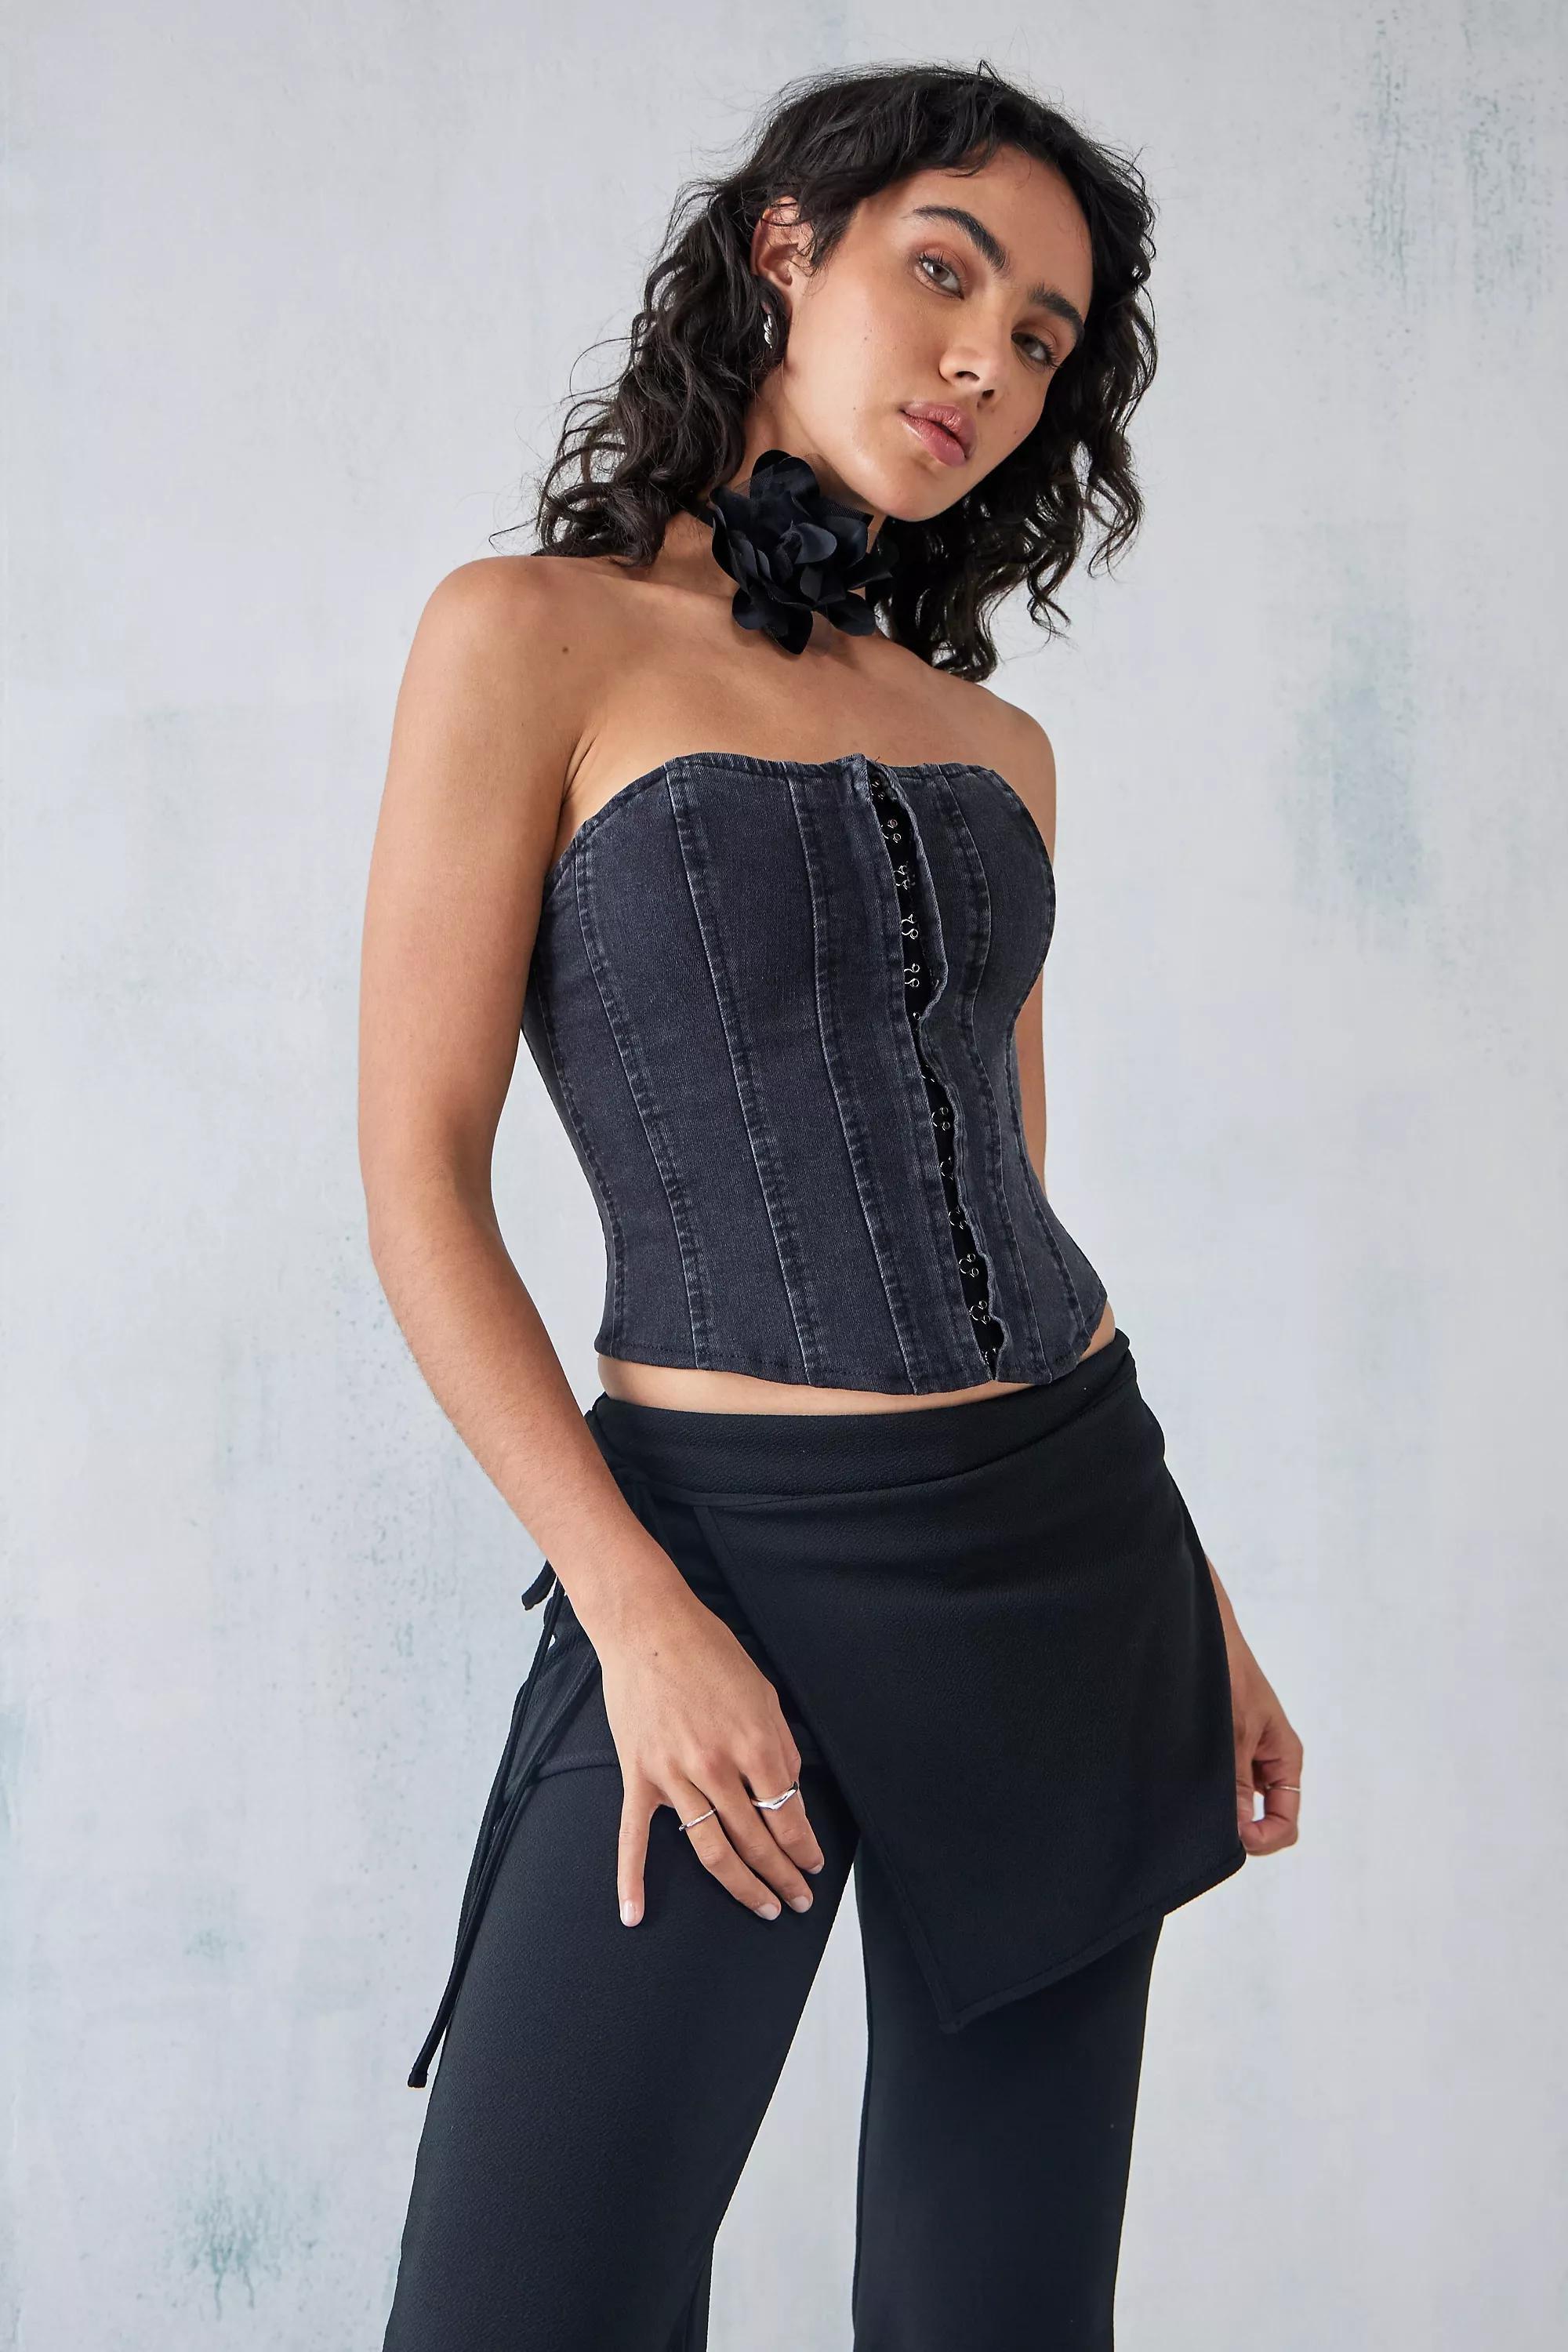 Urban Outfitters Black Denim Lace-Up Corset Top